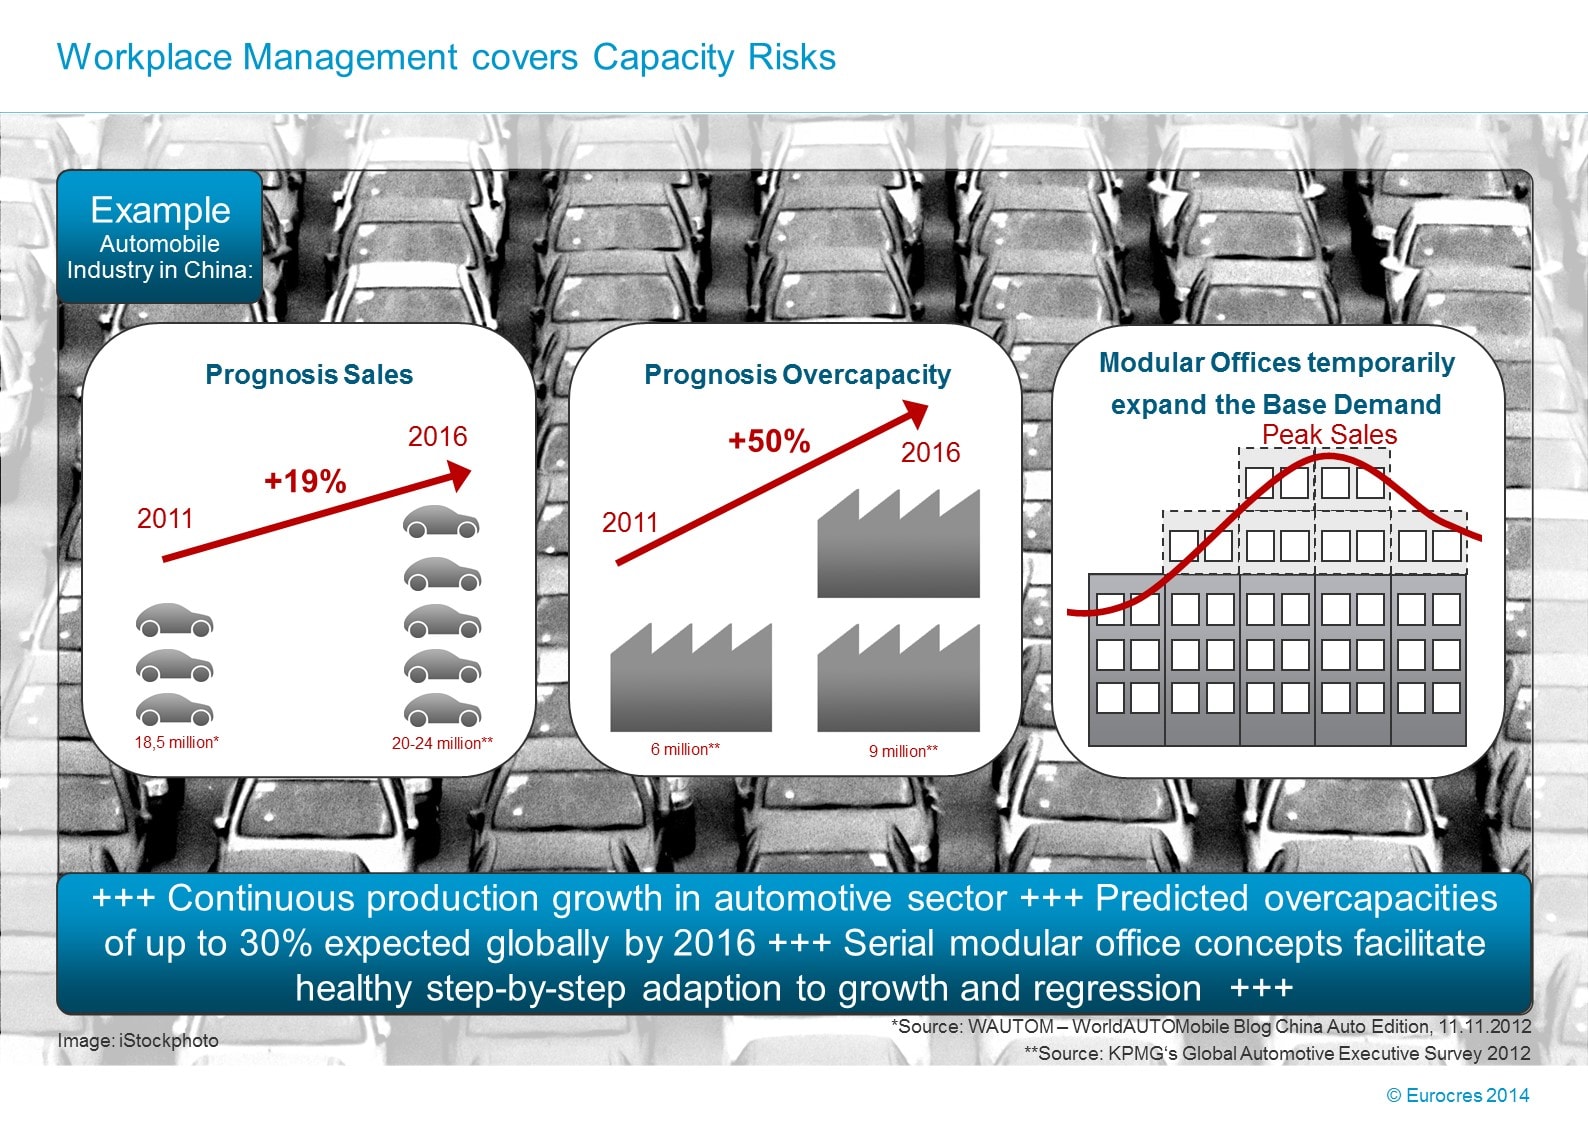 WorkPlace Flash: Workplace Management covers Capacity Risks